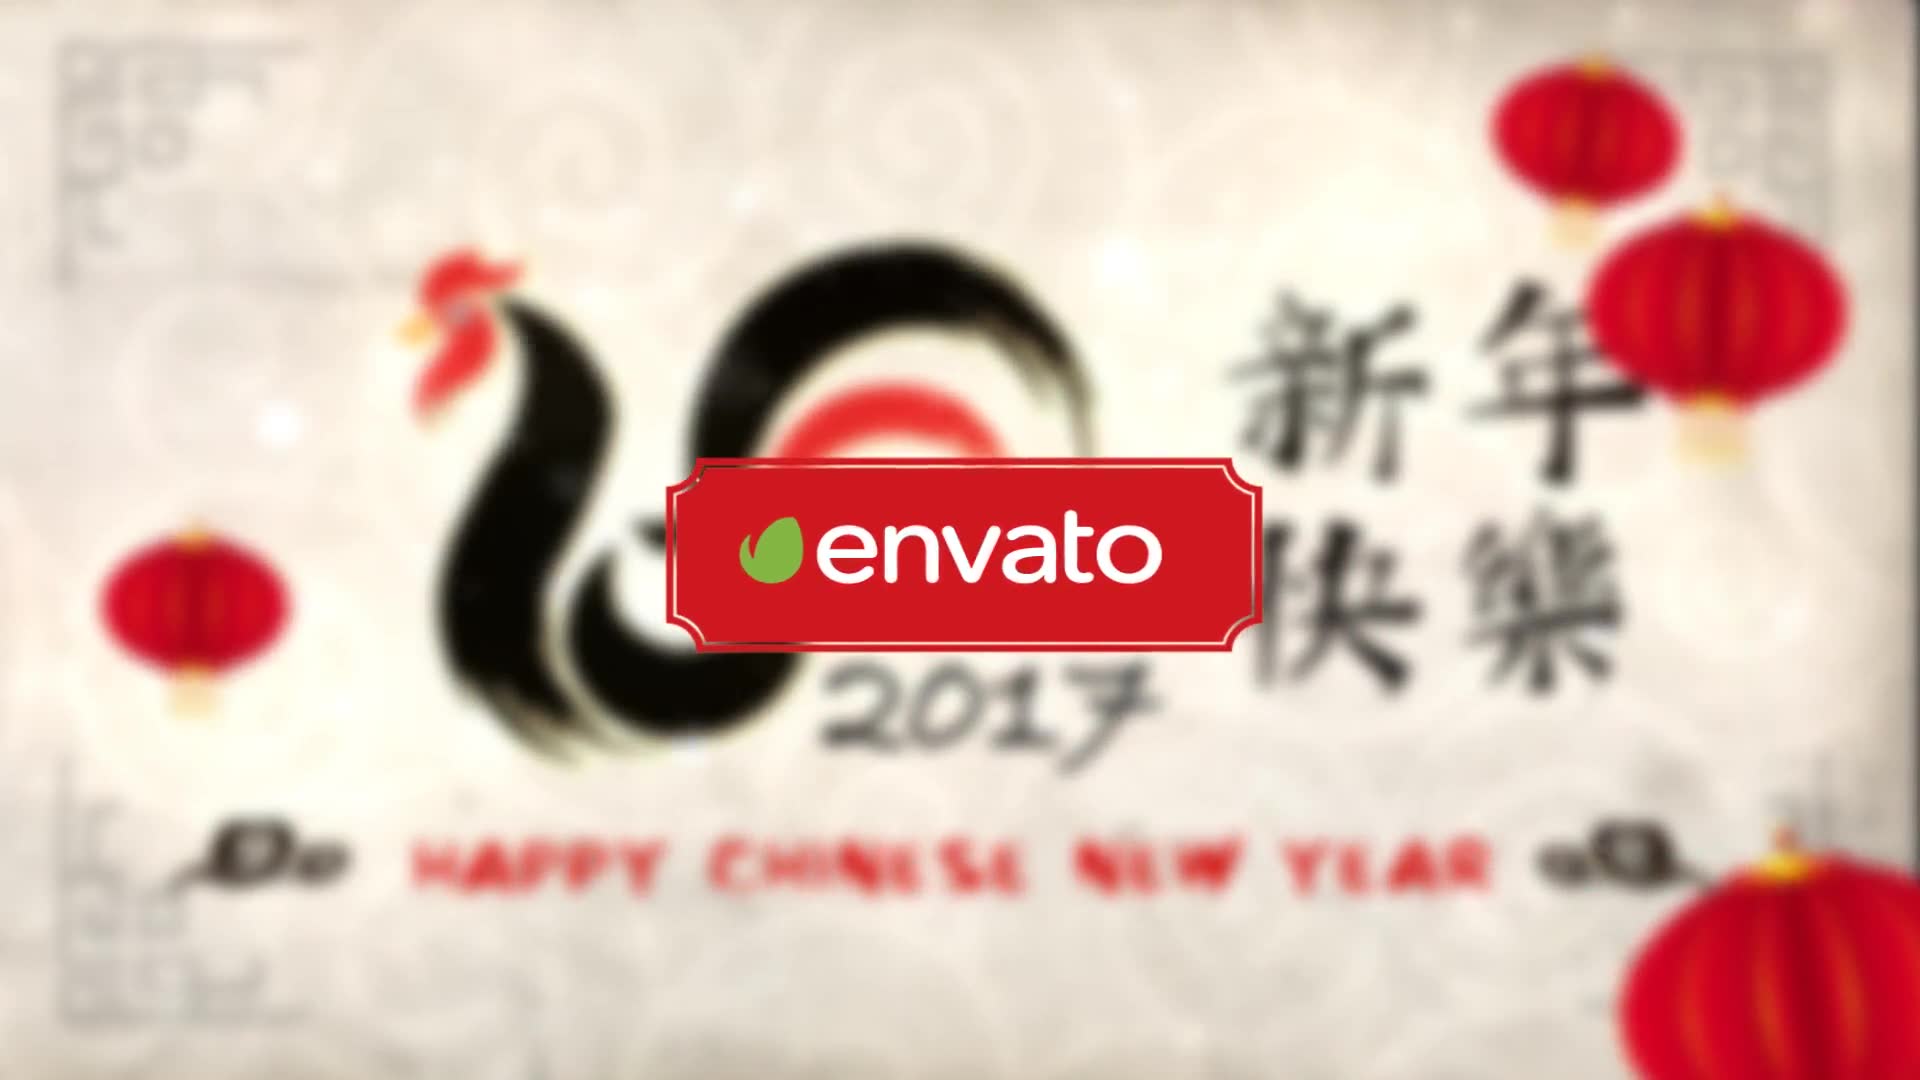 Chinese New Year 2017 - Download Videohive 14398993